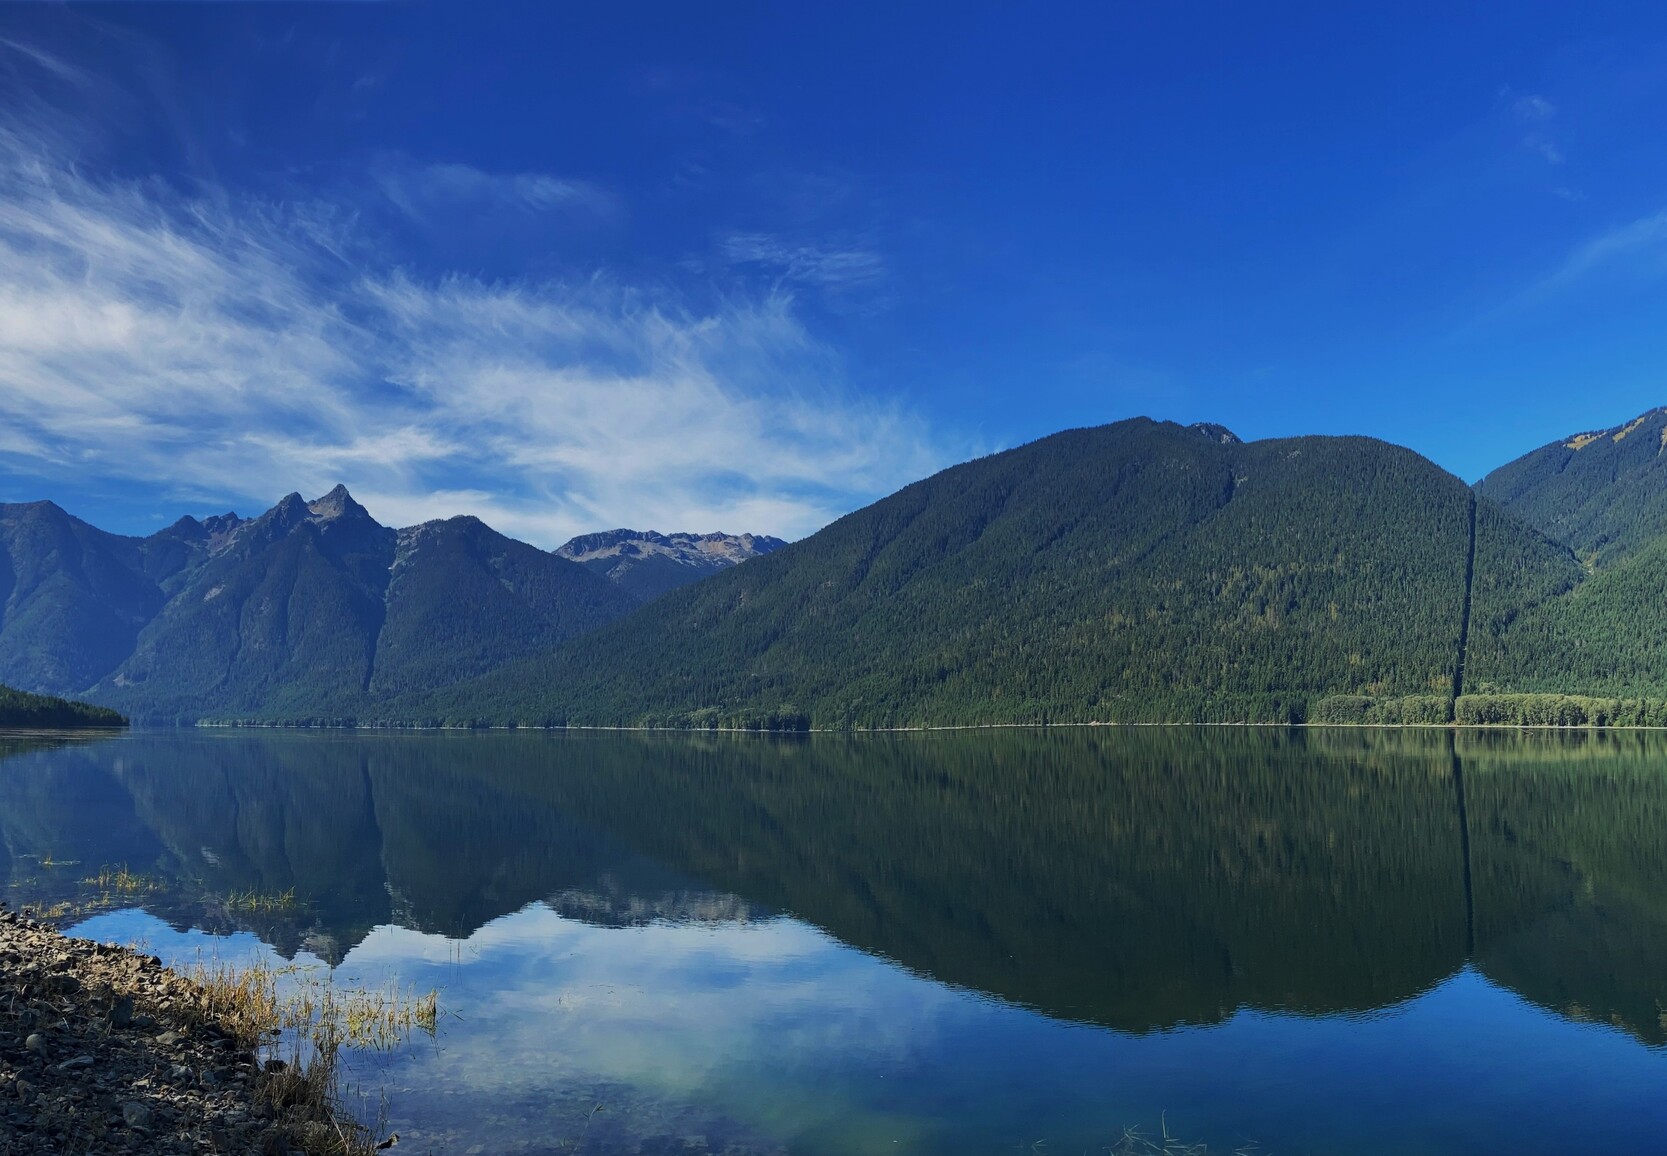 Ross Lake surrounded by mountains and forest. Skagit Valley Park.